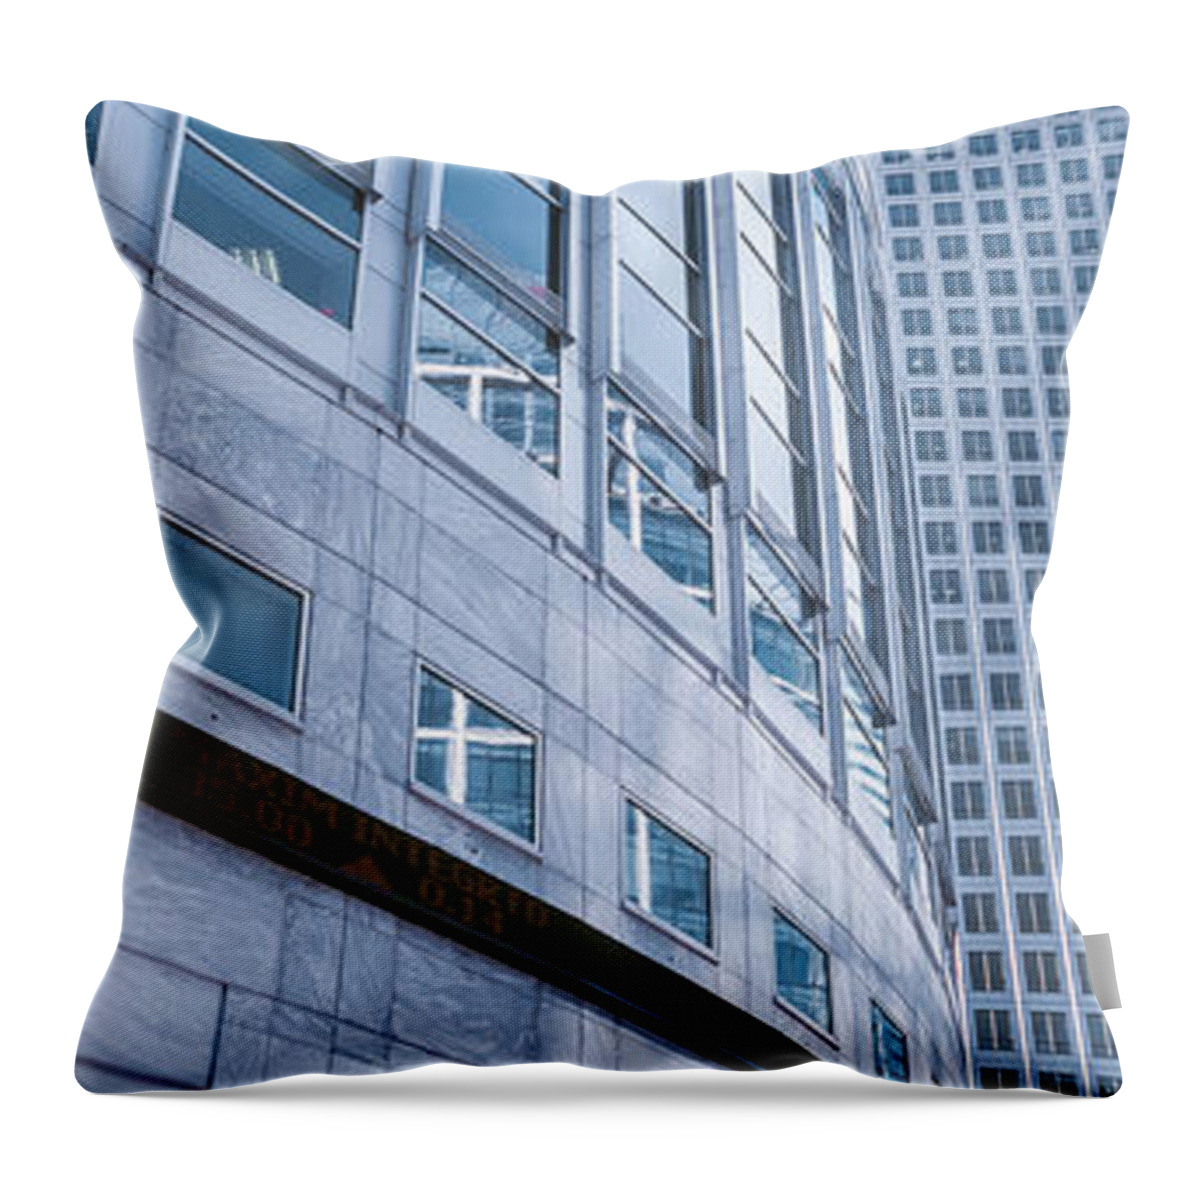 Photography Throw Pillow featuring the photograph Skyscrapers In A City, Canary Wharf #1 by Panoramic Images